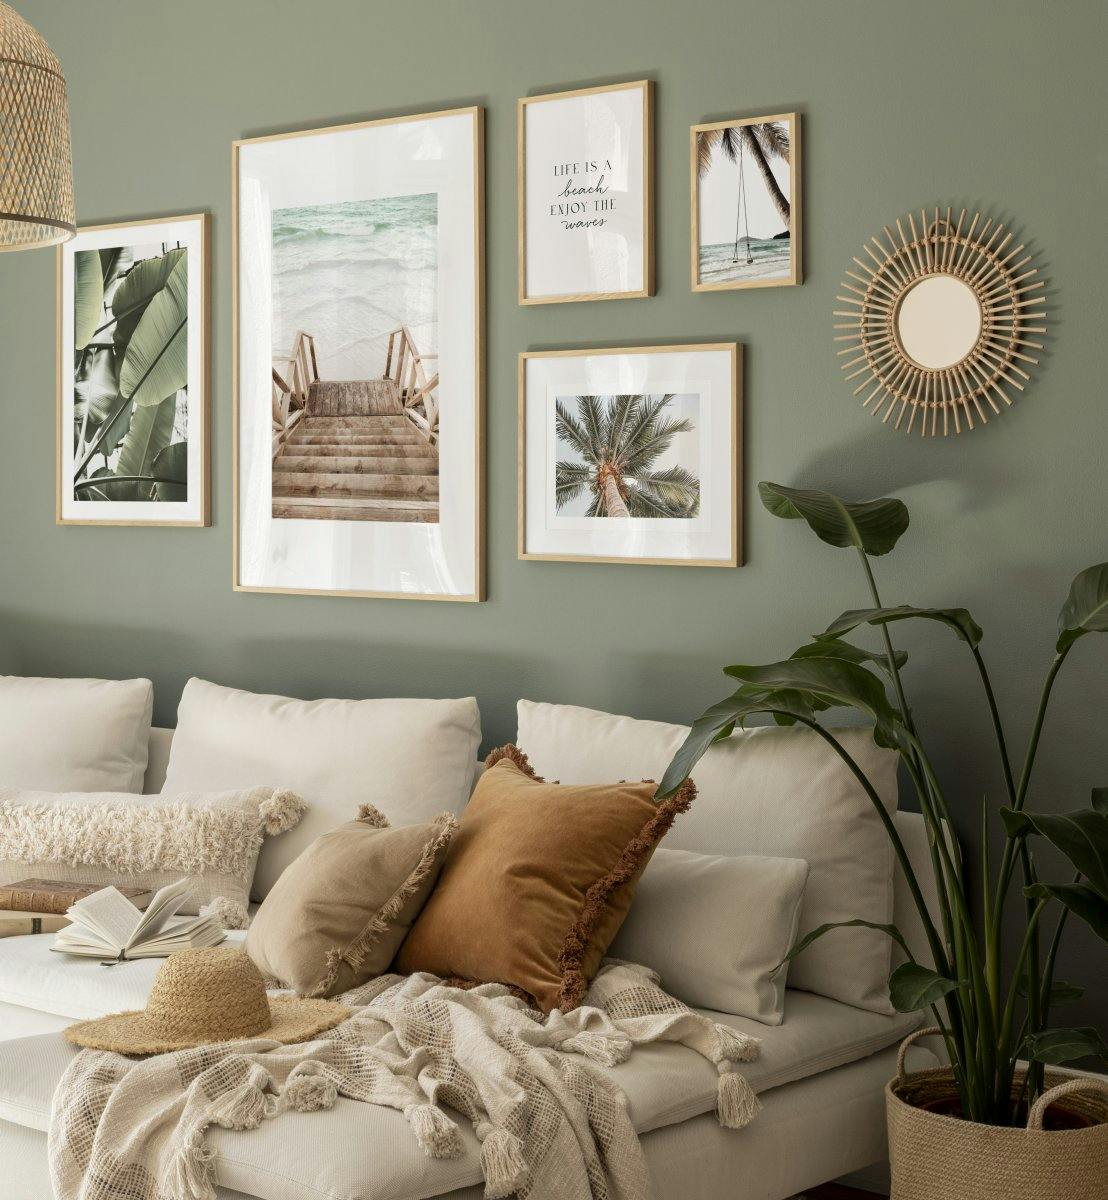 Green and beige bohemic gallery wall with nature prints and photo art for bedroom